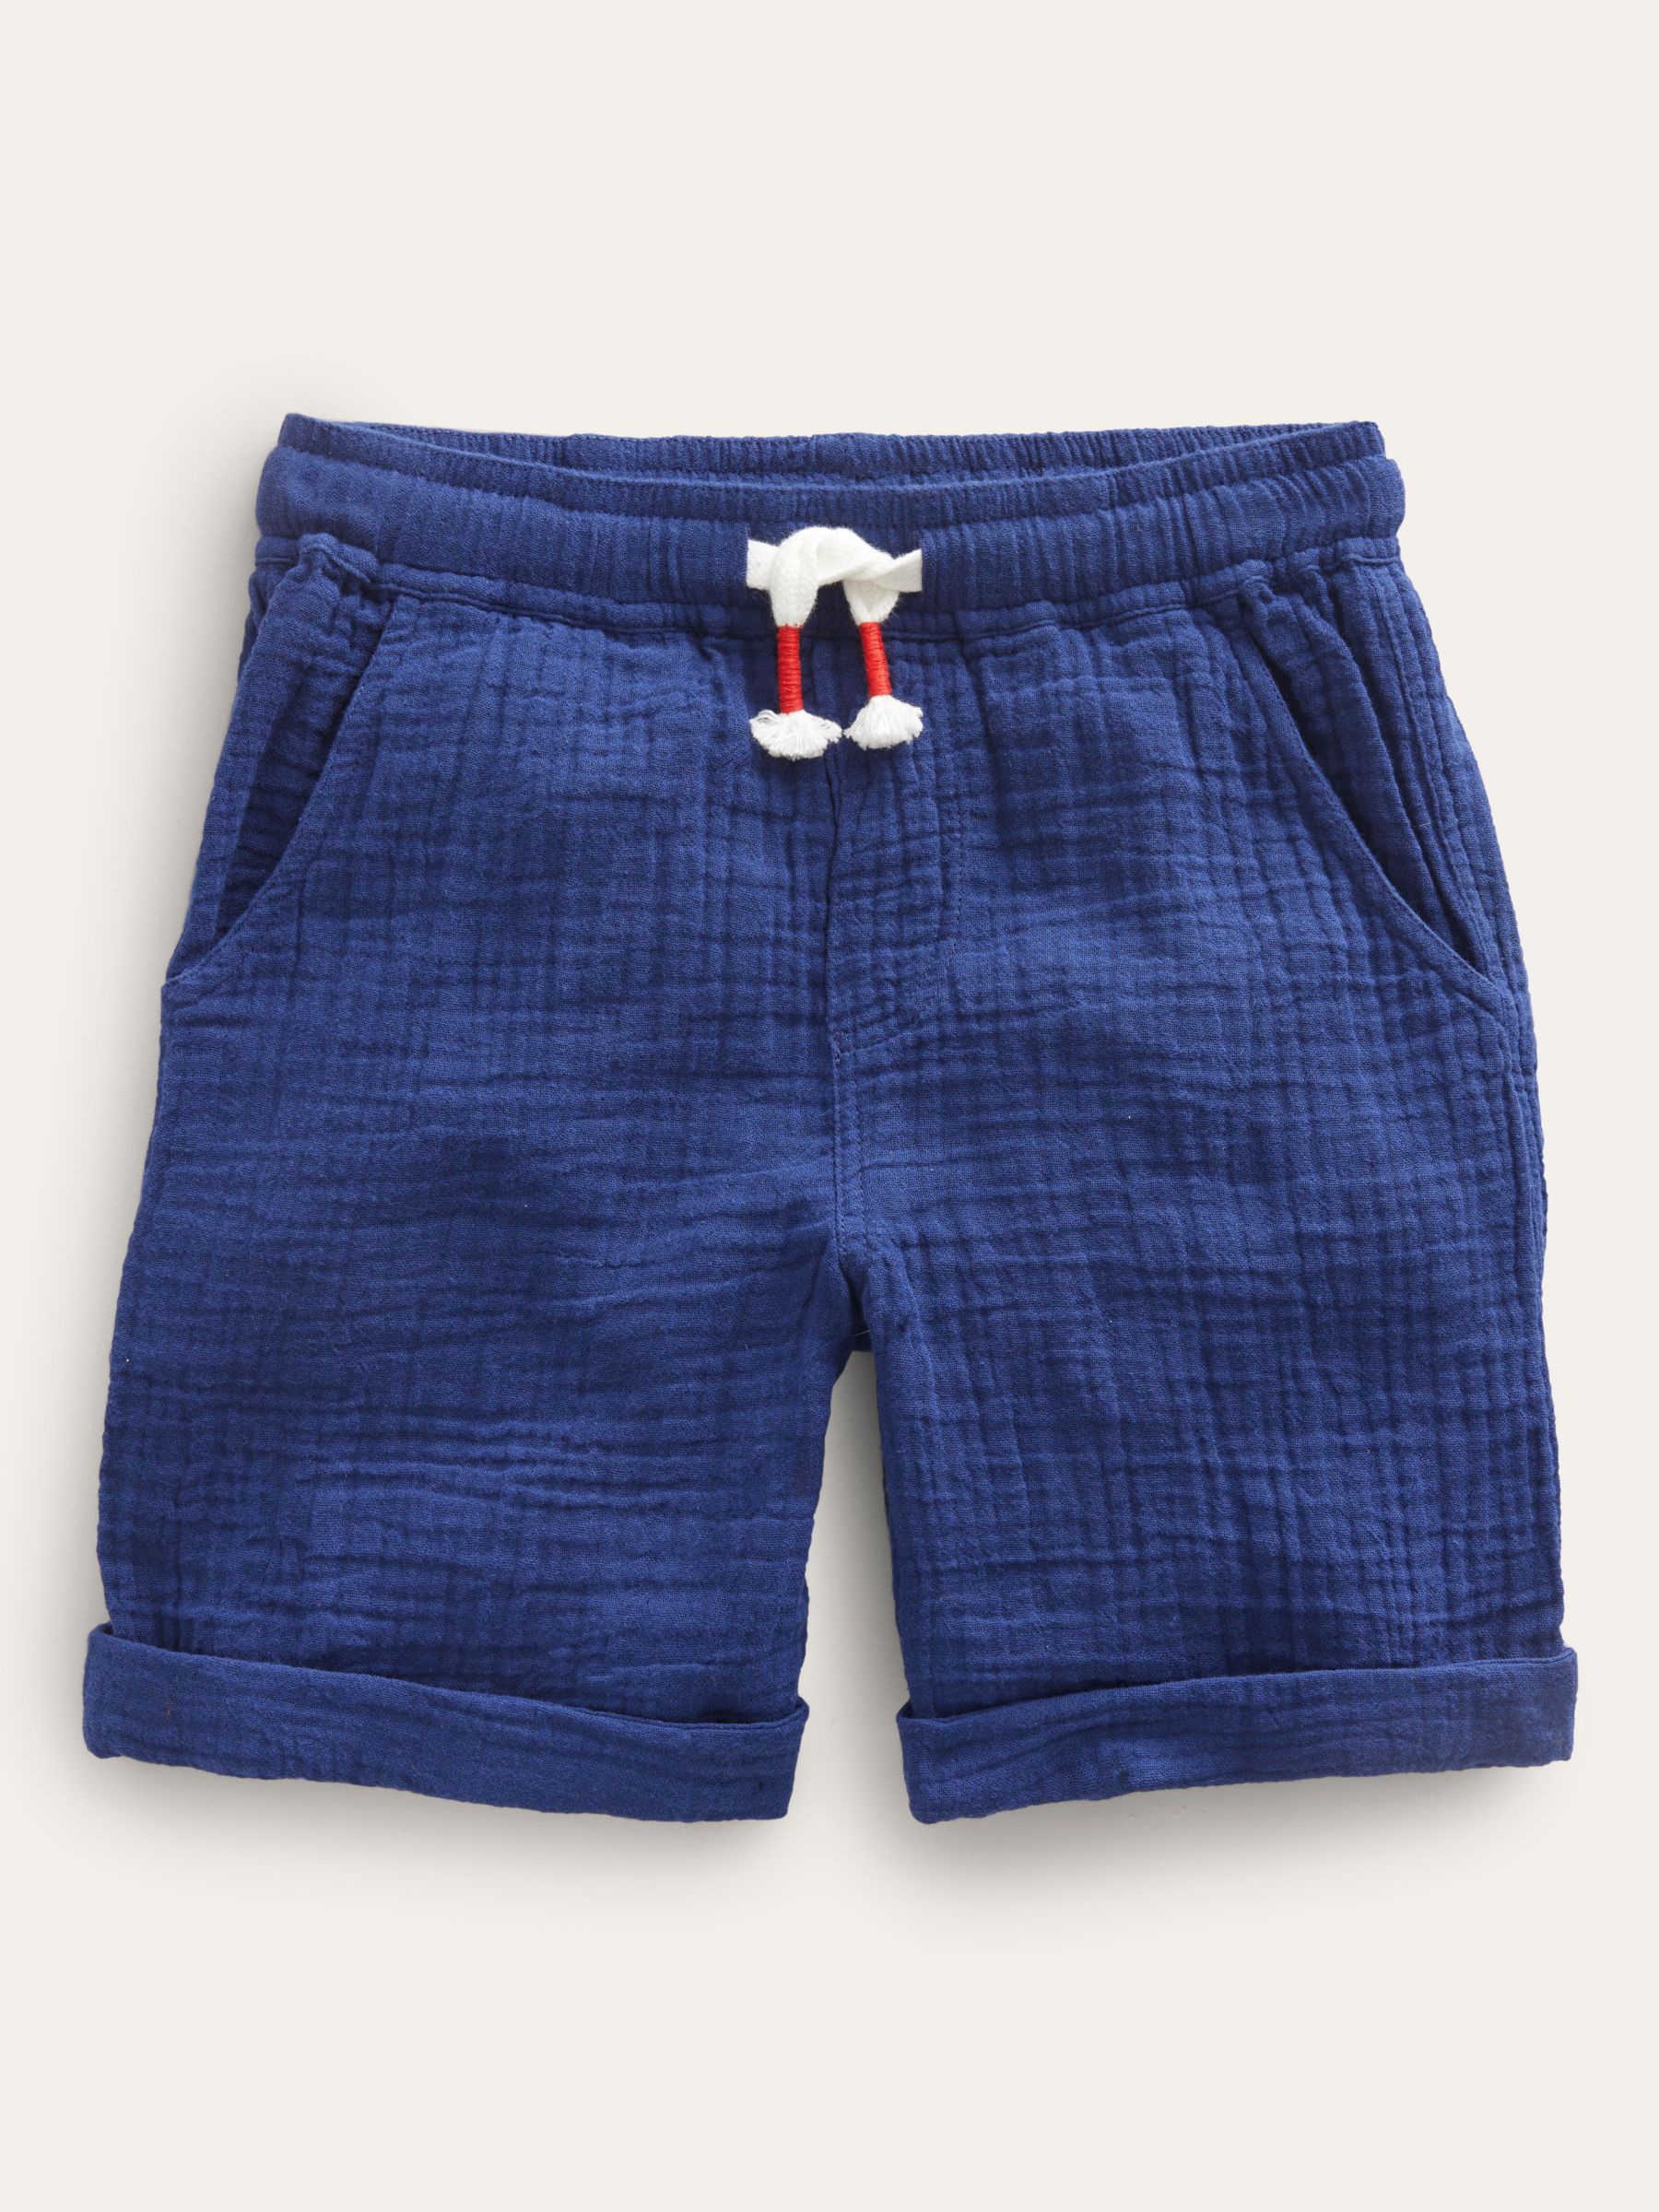 Mini Boden: 25% Off + Free Shipping!